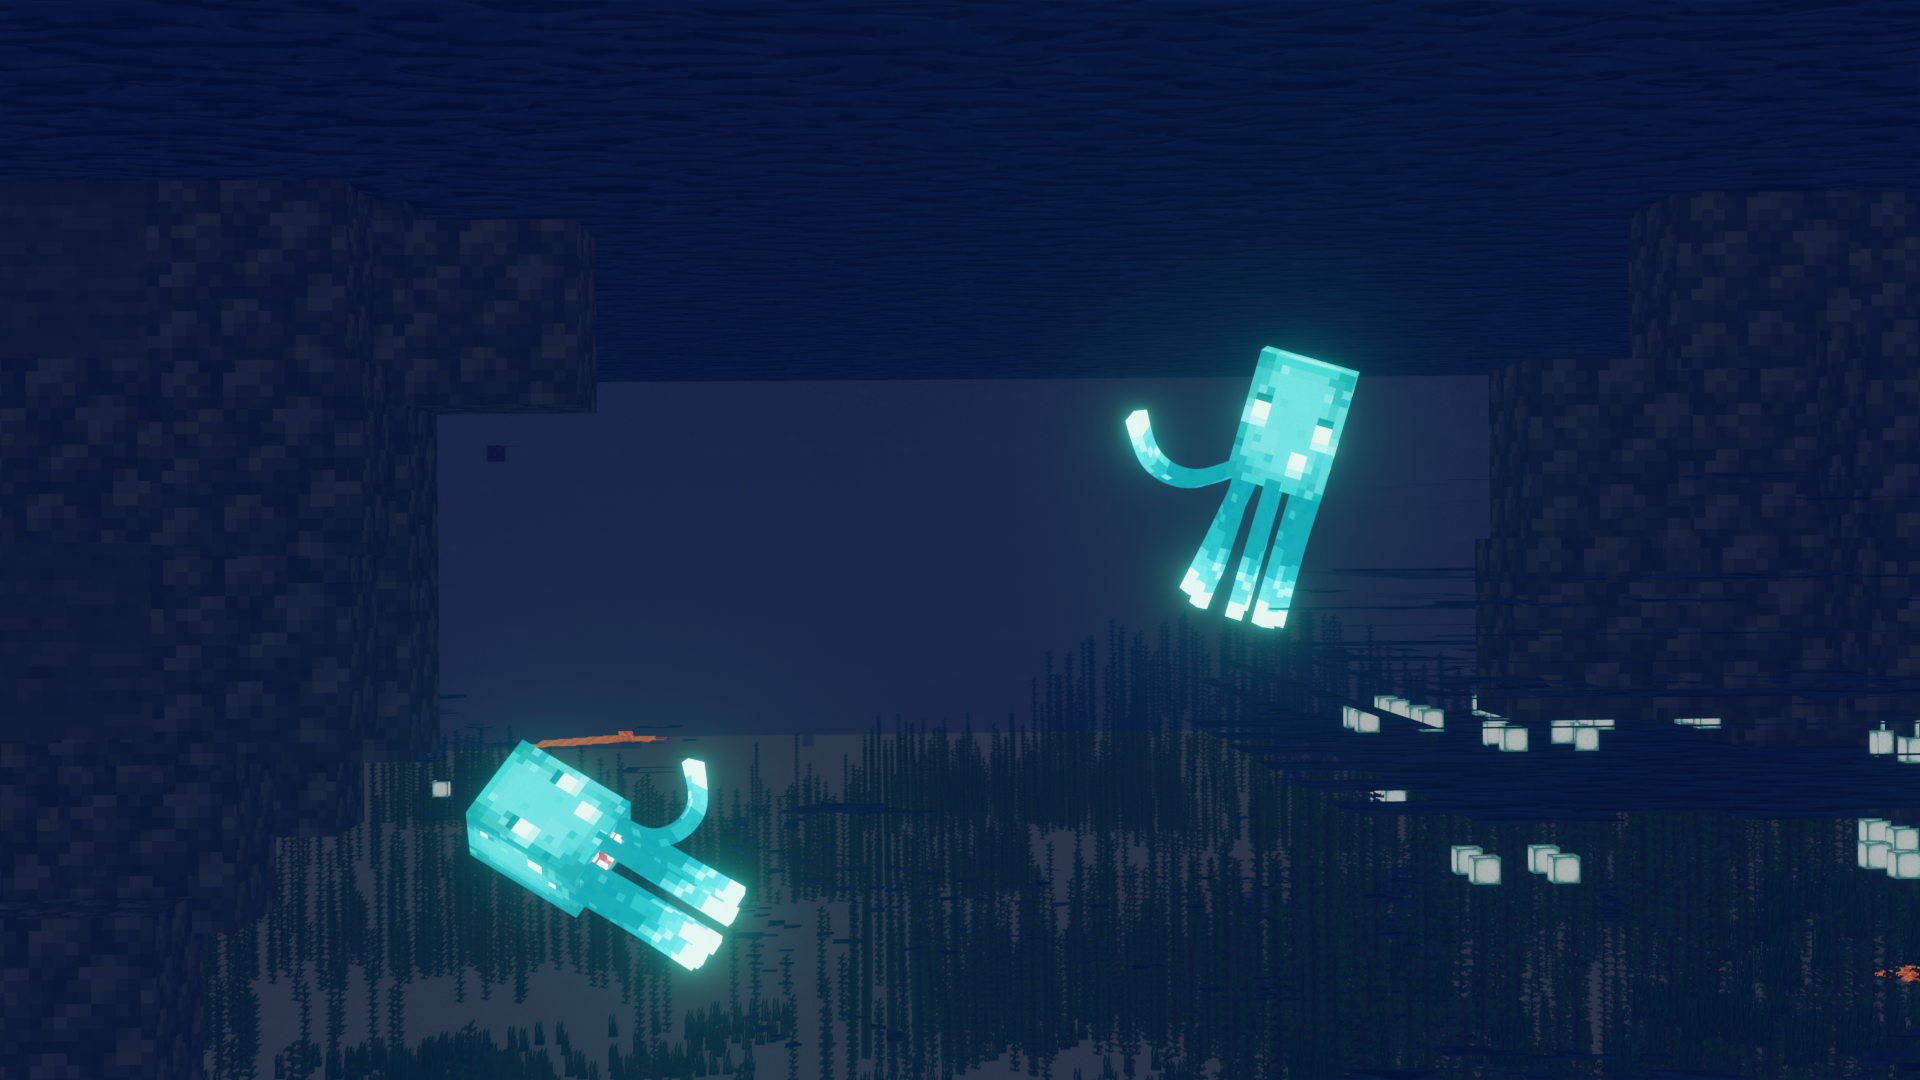 GlowSquid for the win lol new render, making some parts of the squids texture glow took so long lol #VOTEFORGLOWSQUID